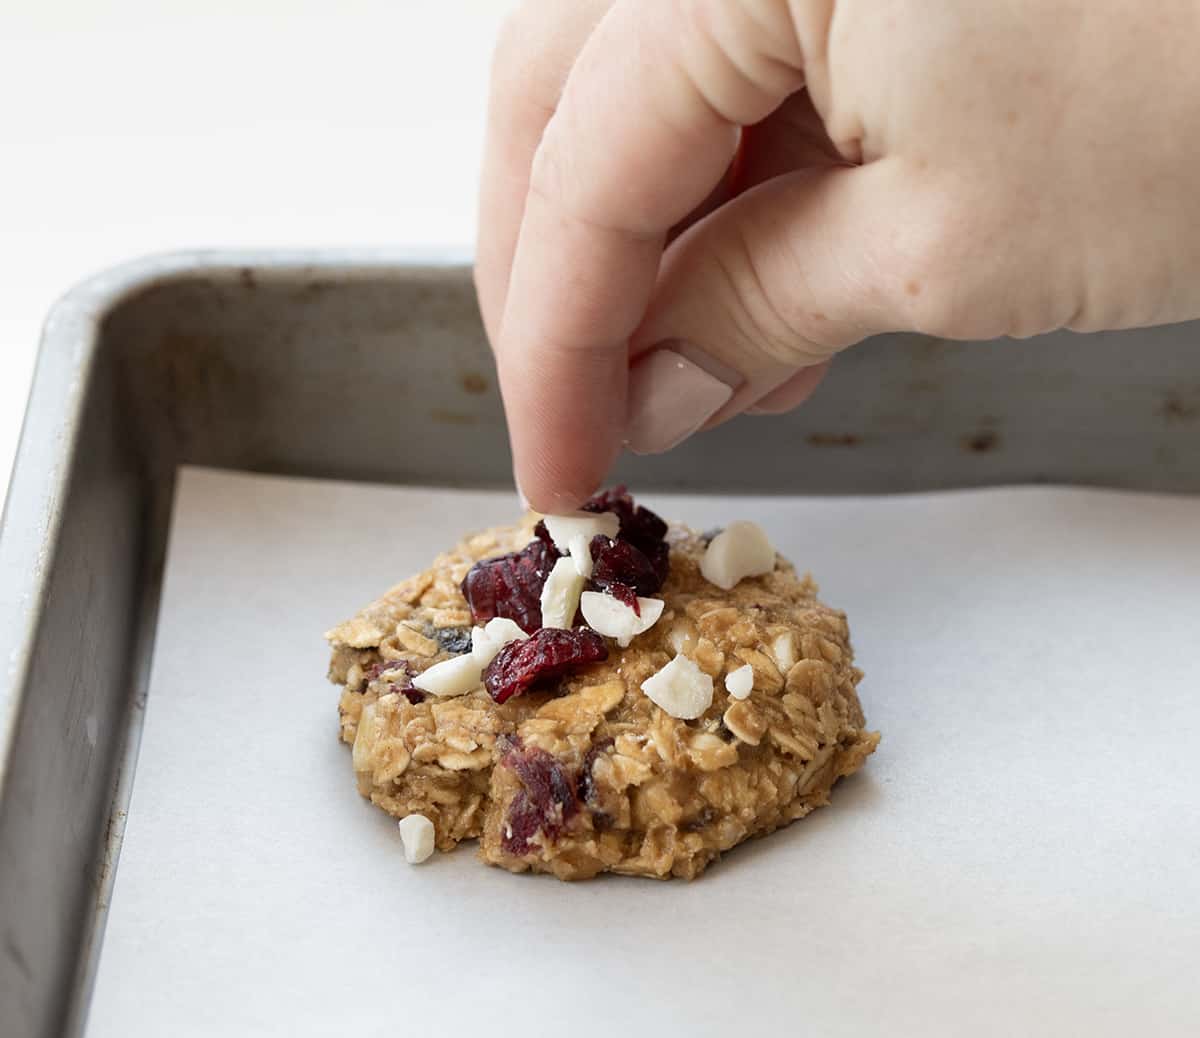 Adding toppings to White Chocolate Cranberry Oatmeal Cookies before baking.